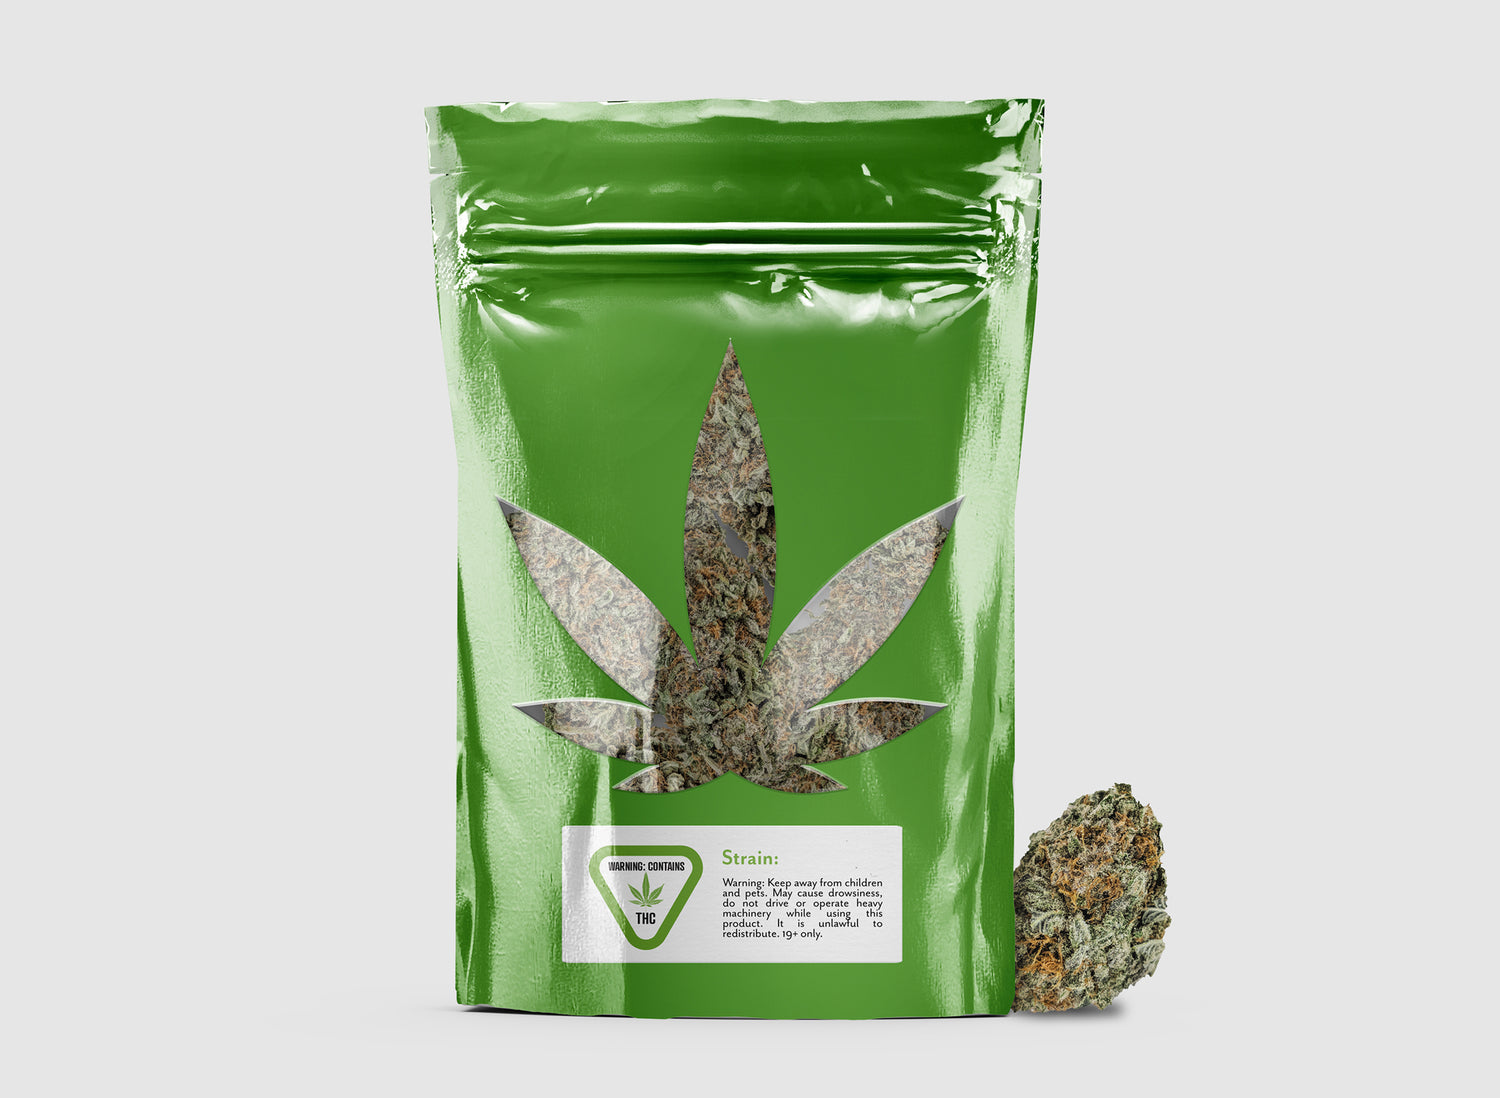 The Evolution of Cannabis Packaging